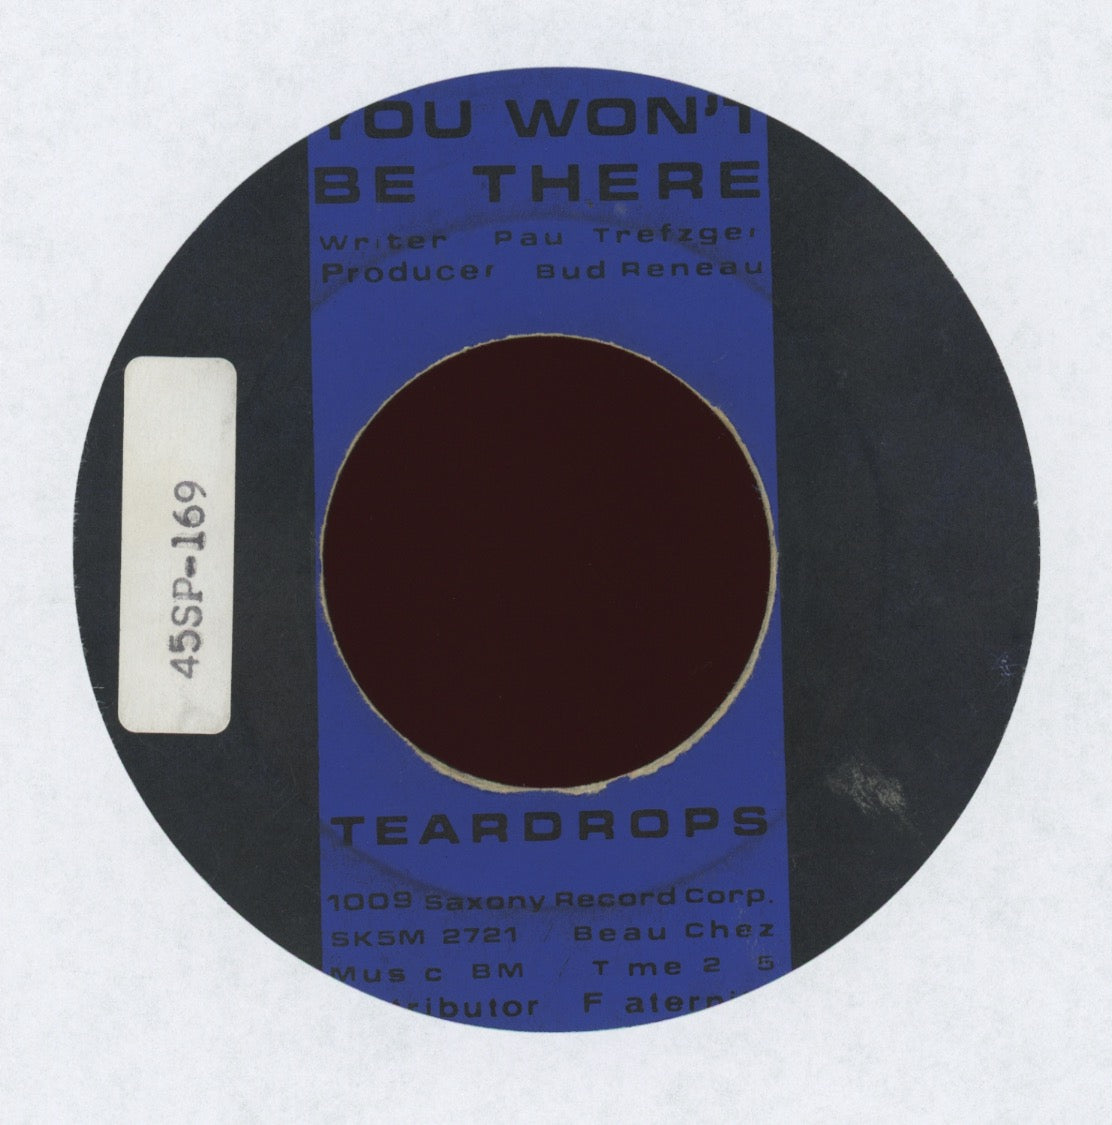 The Teardrops - You Won't Be There on Saxony